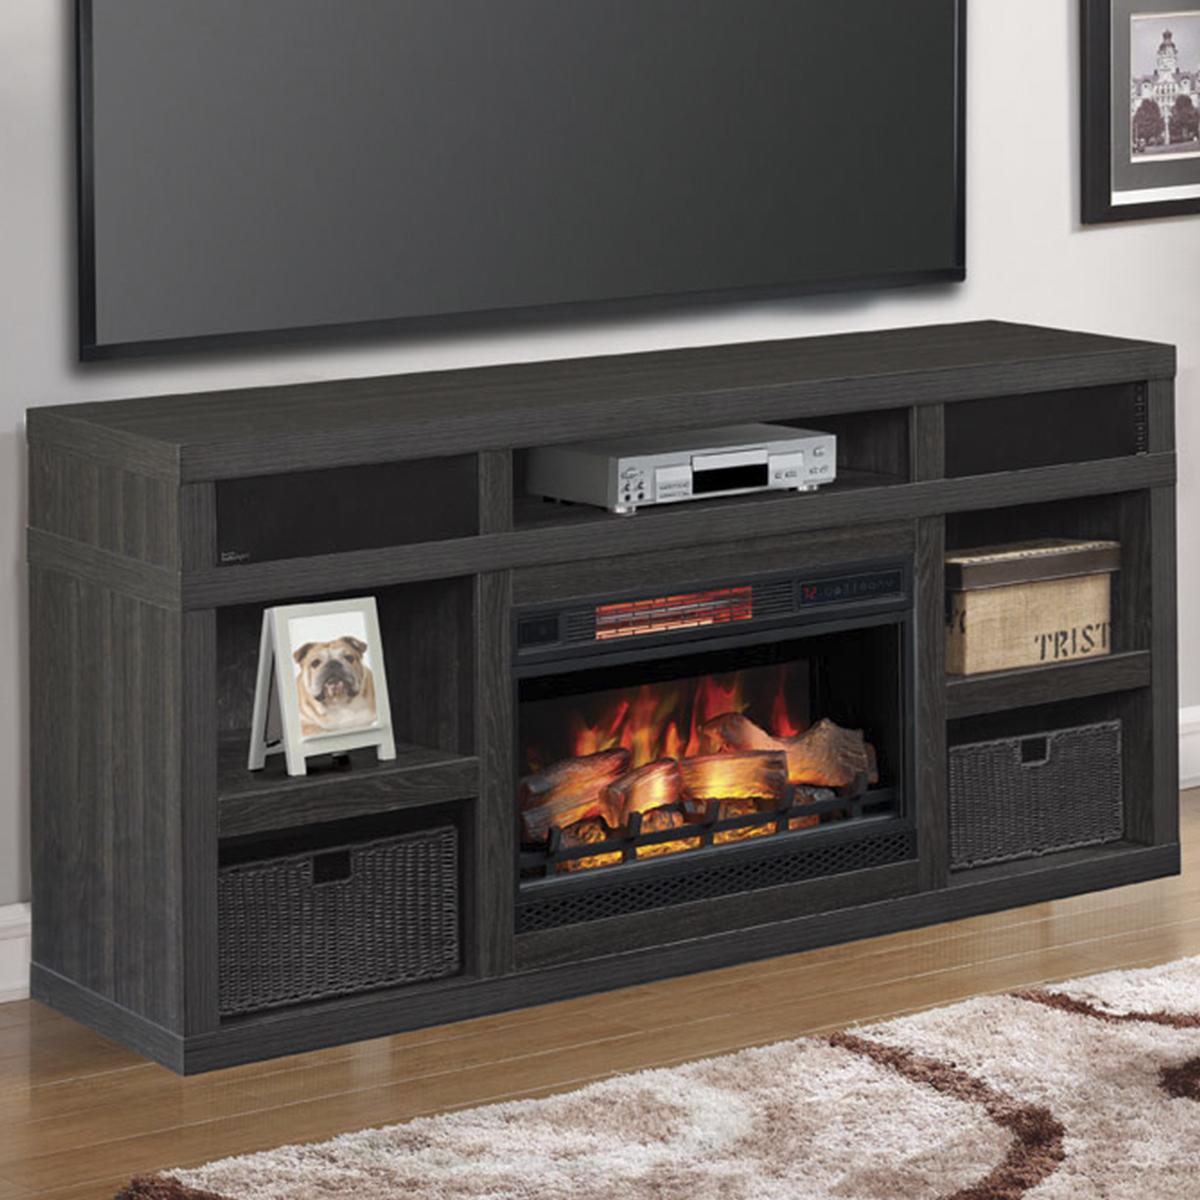 White Fireplace Tv Stand Best Of Fabio Flames Greatlin 64" Tv Stand In Black Walnut